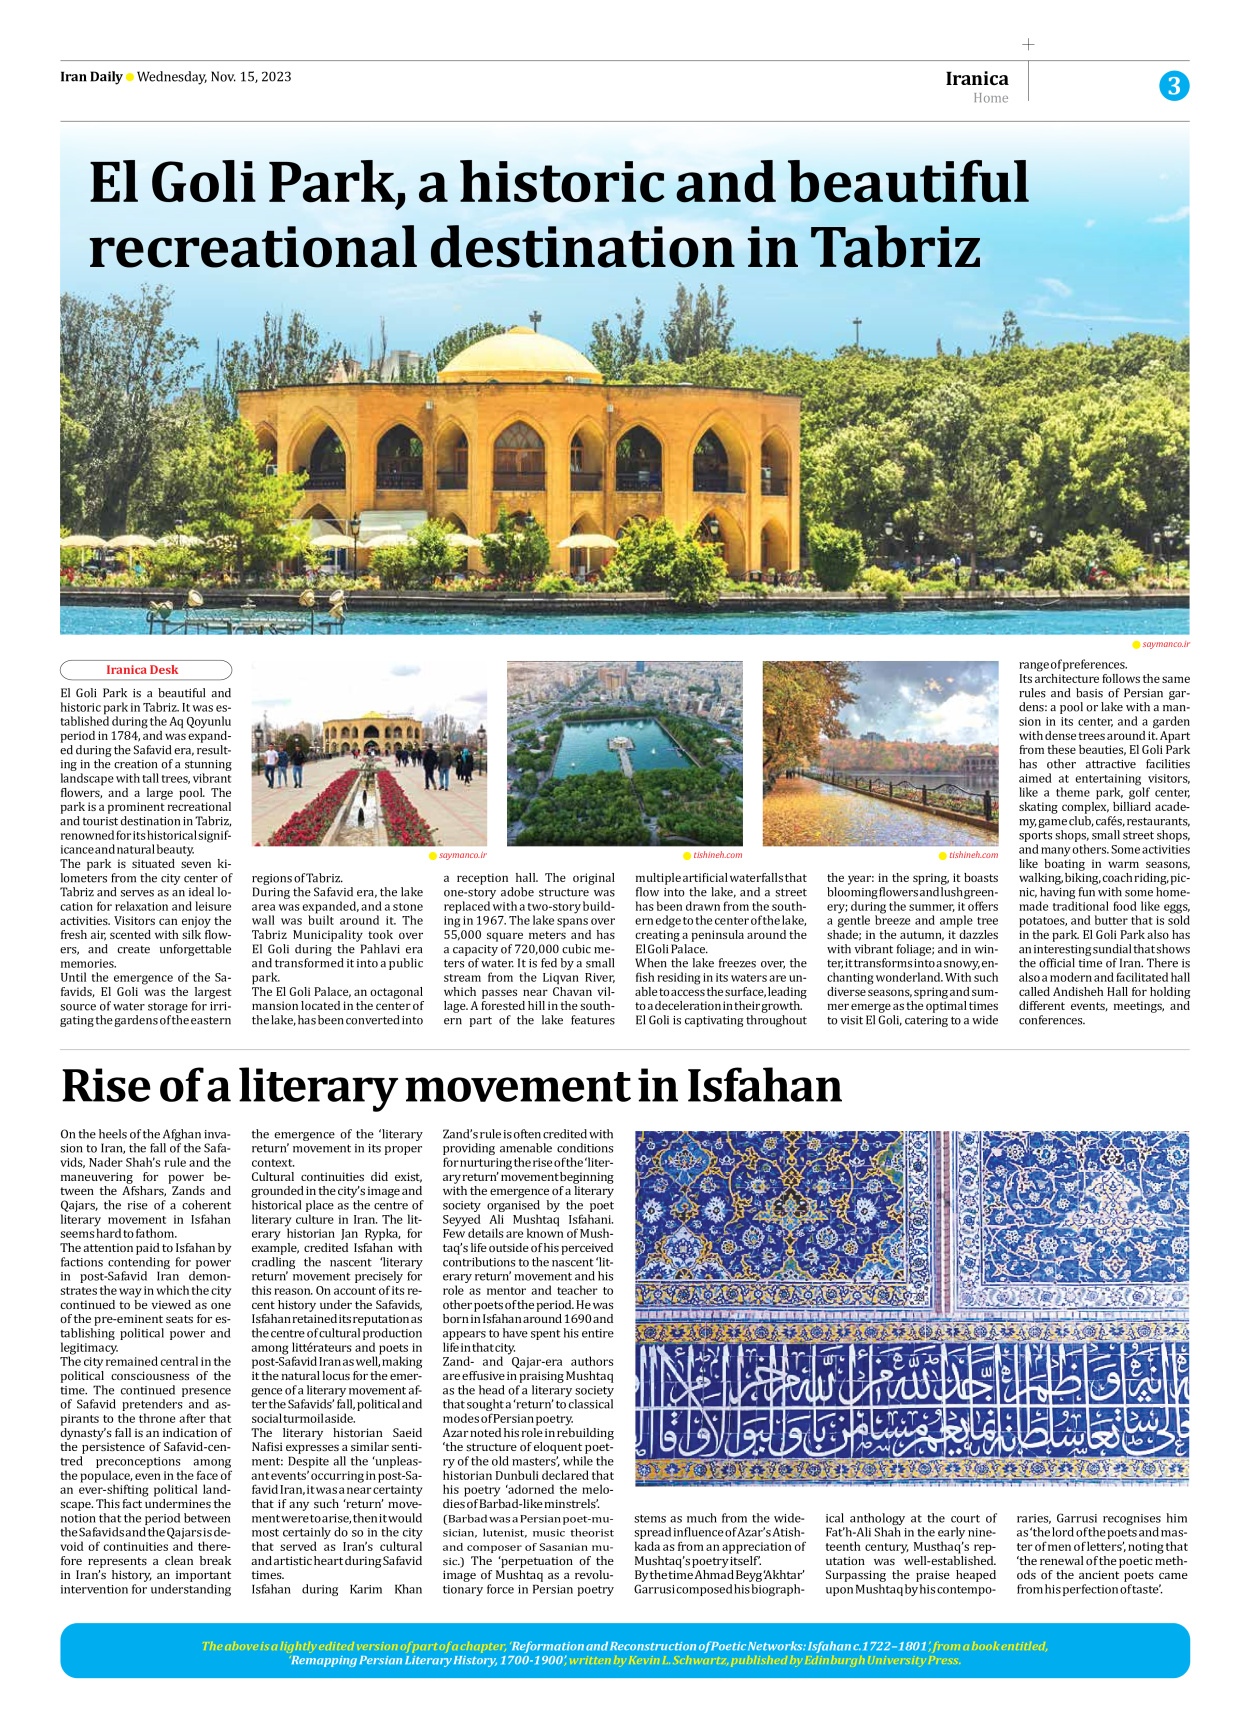 Iran Daily - Number Seven Thousand Four Hundred and Thirty Five - 15 November 2023 - Page 3